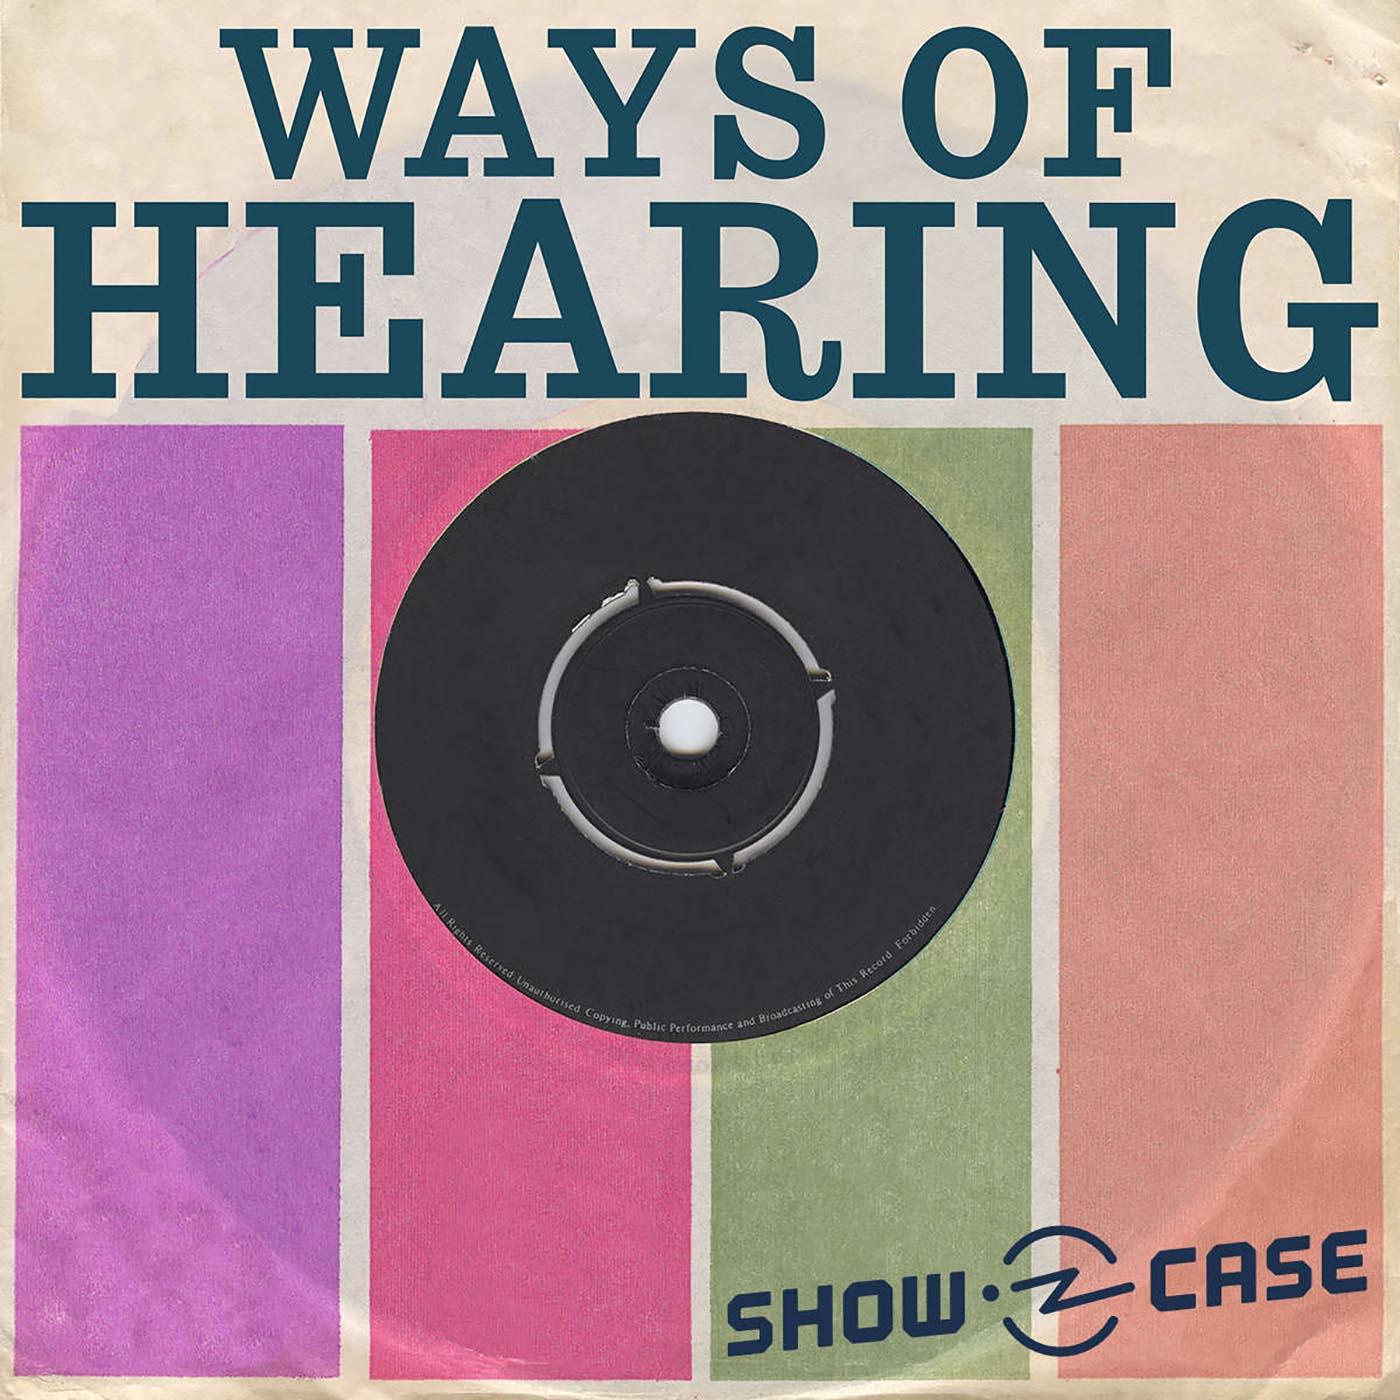 Thumbnail for "Ways of Hearing #3 – LOVE".